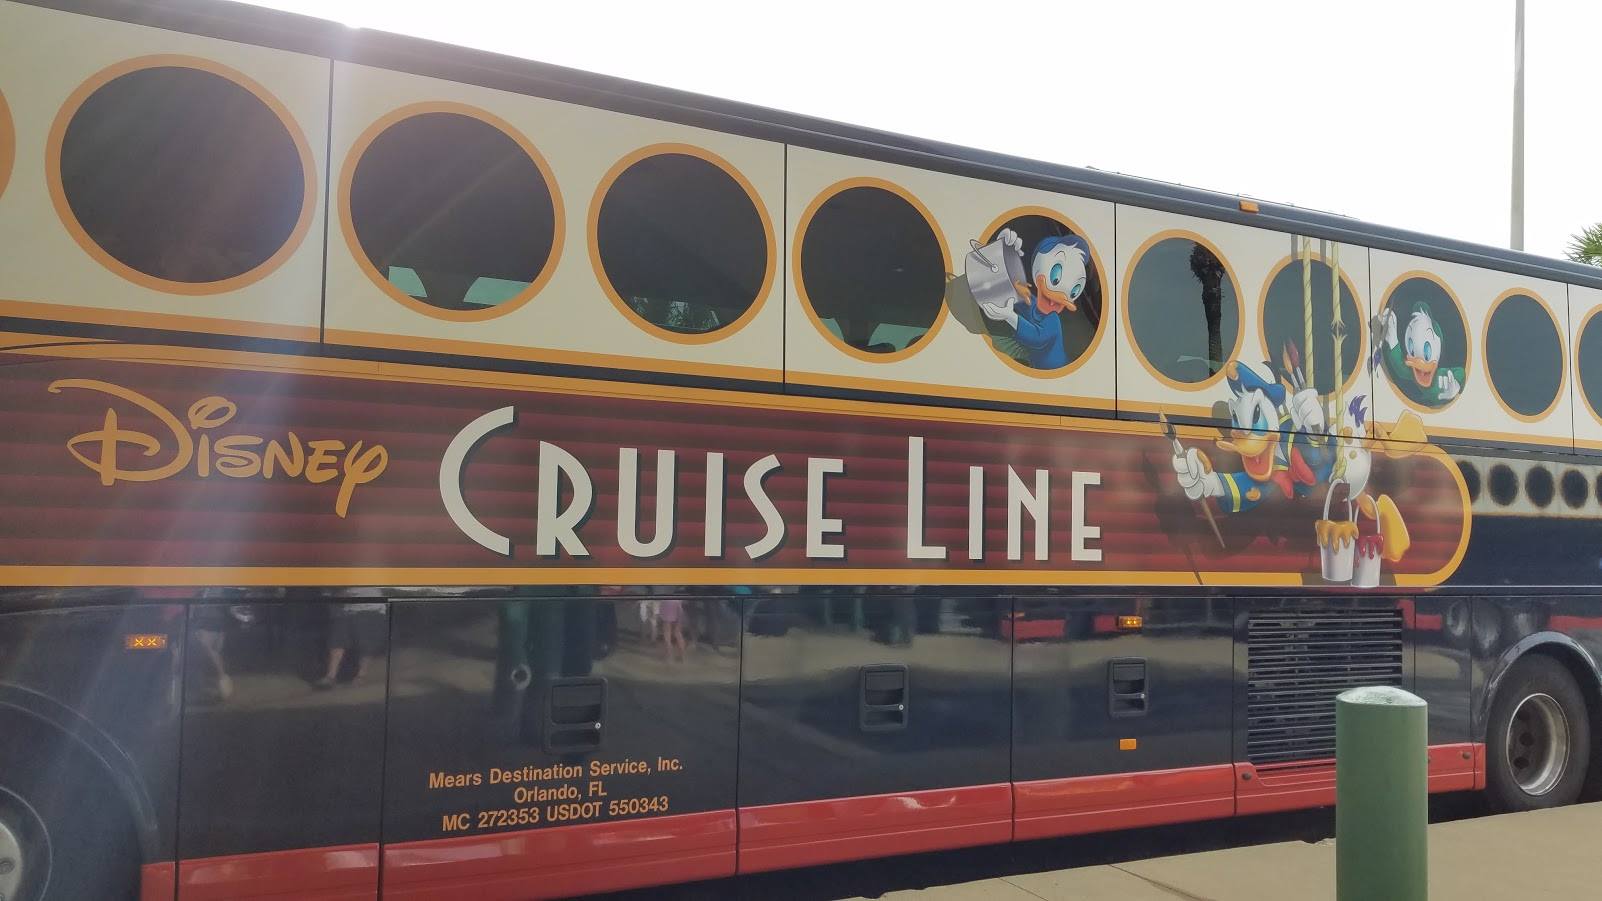 Disney Wins best Dining and Family Cruise from 2016 Cruise Critic Awards